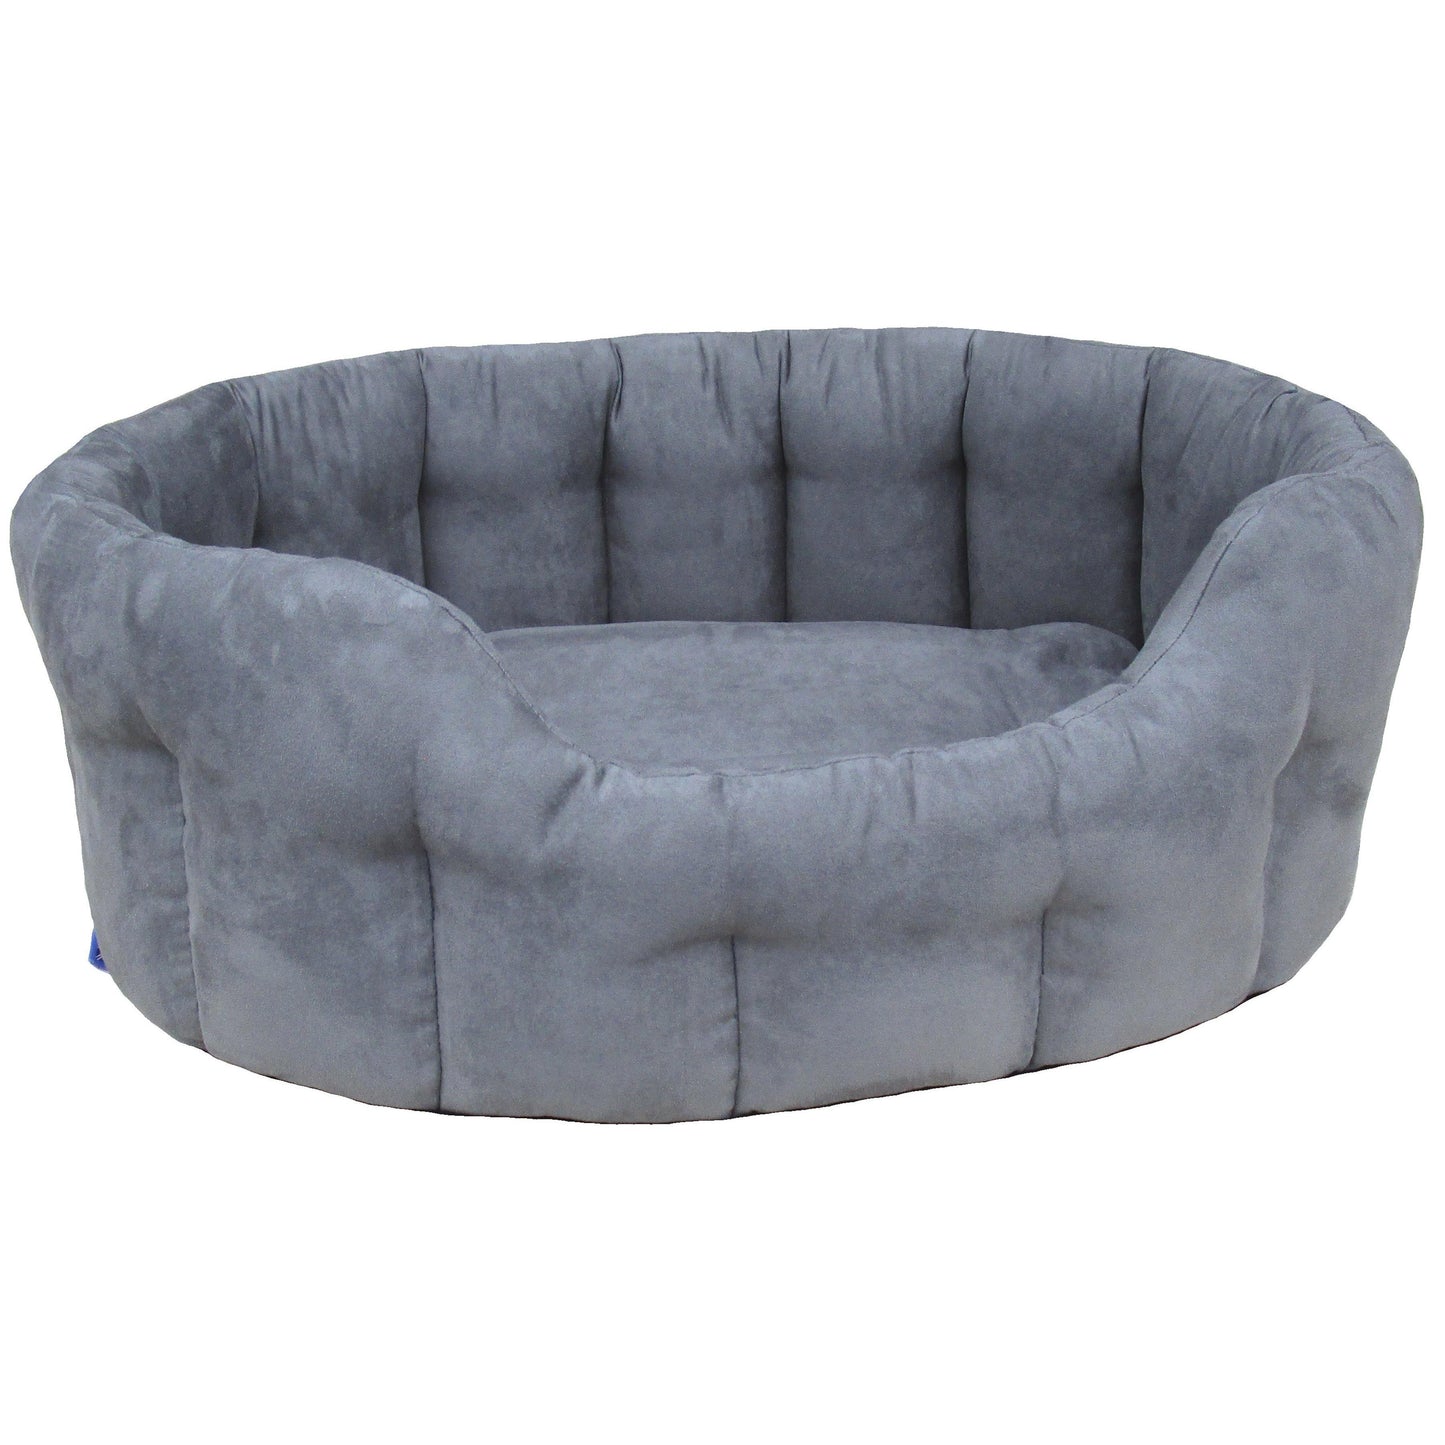 P&L Premium Heavy Duty Oval Faux Suede Dog Bed - Dog Bed Outlet